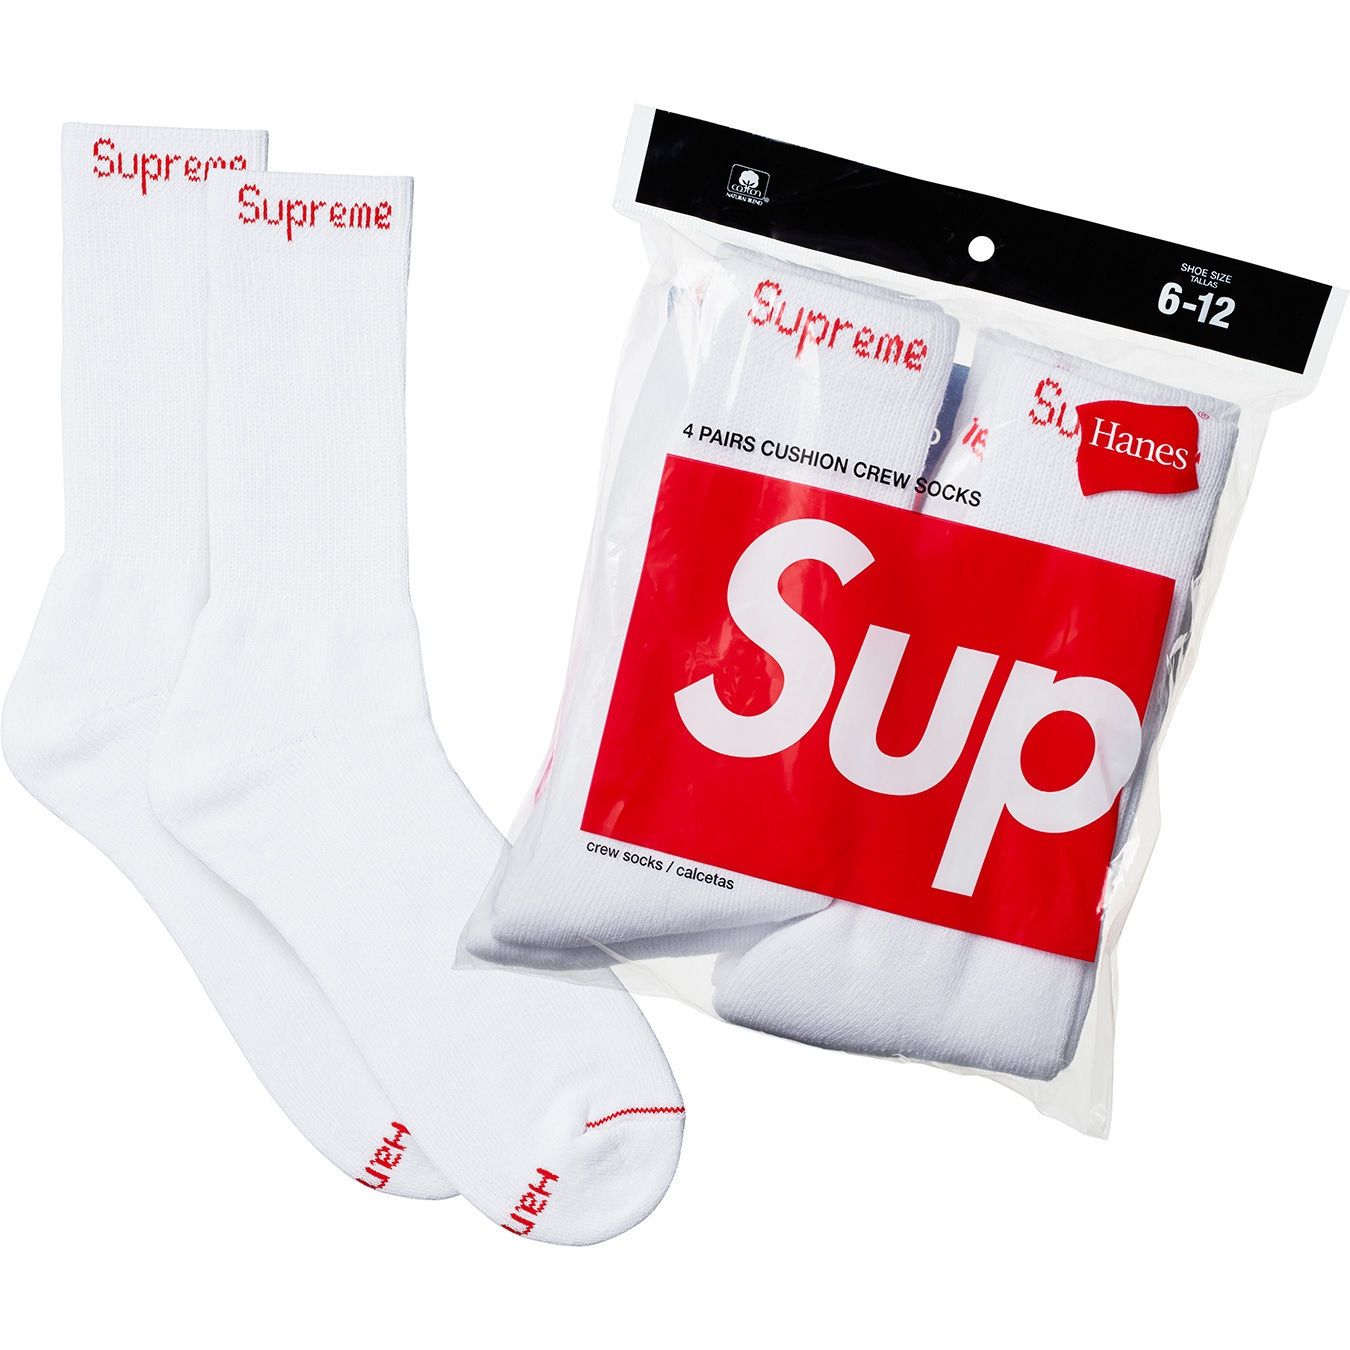 I bought this supreme x hanes t for 20 euro from a resell shop